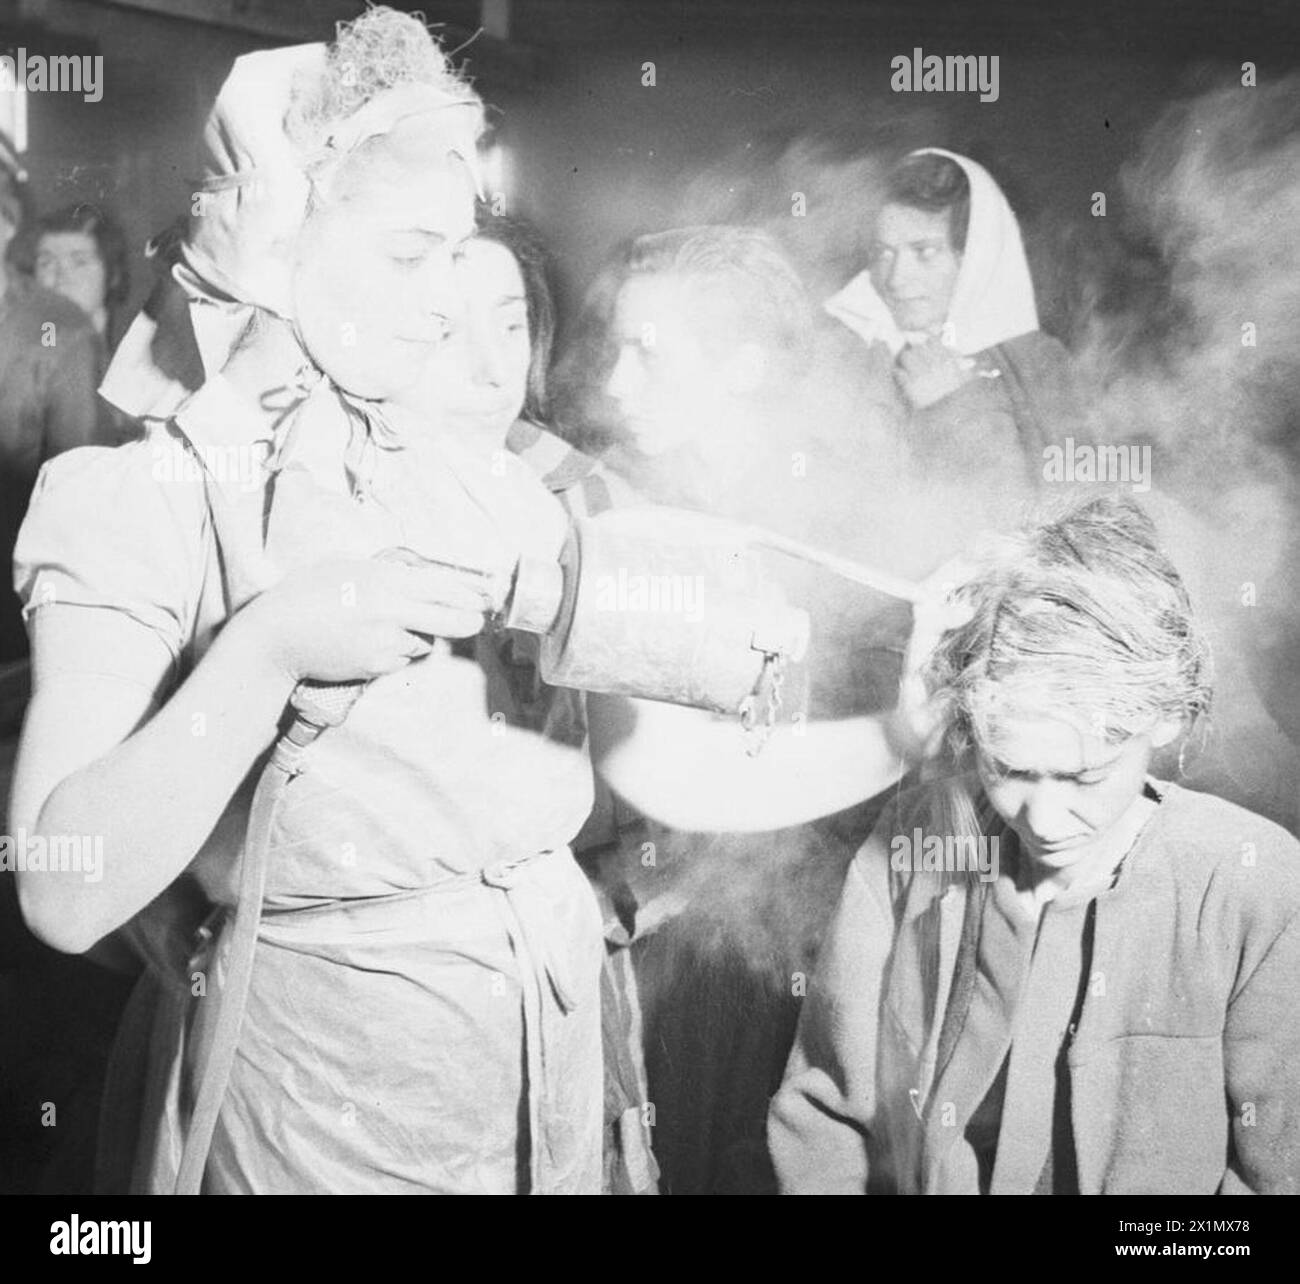 THE LIBERATION OF BERGEN-BELSEN CONCENTRATION CAMP, MAY 1945 - After dressing in clean clothes, a woman inmate is dusted with DDT powder to kill the lice which spread typhus. The dusting is done by other former camp inmates (many of whom were trained nurses before being interned) under the supervision of the Royal Army Medical Corps, British Army, Royal Army Medical Corps Stock Photo